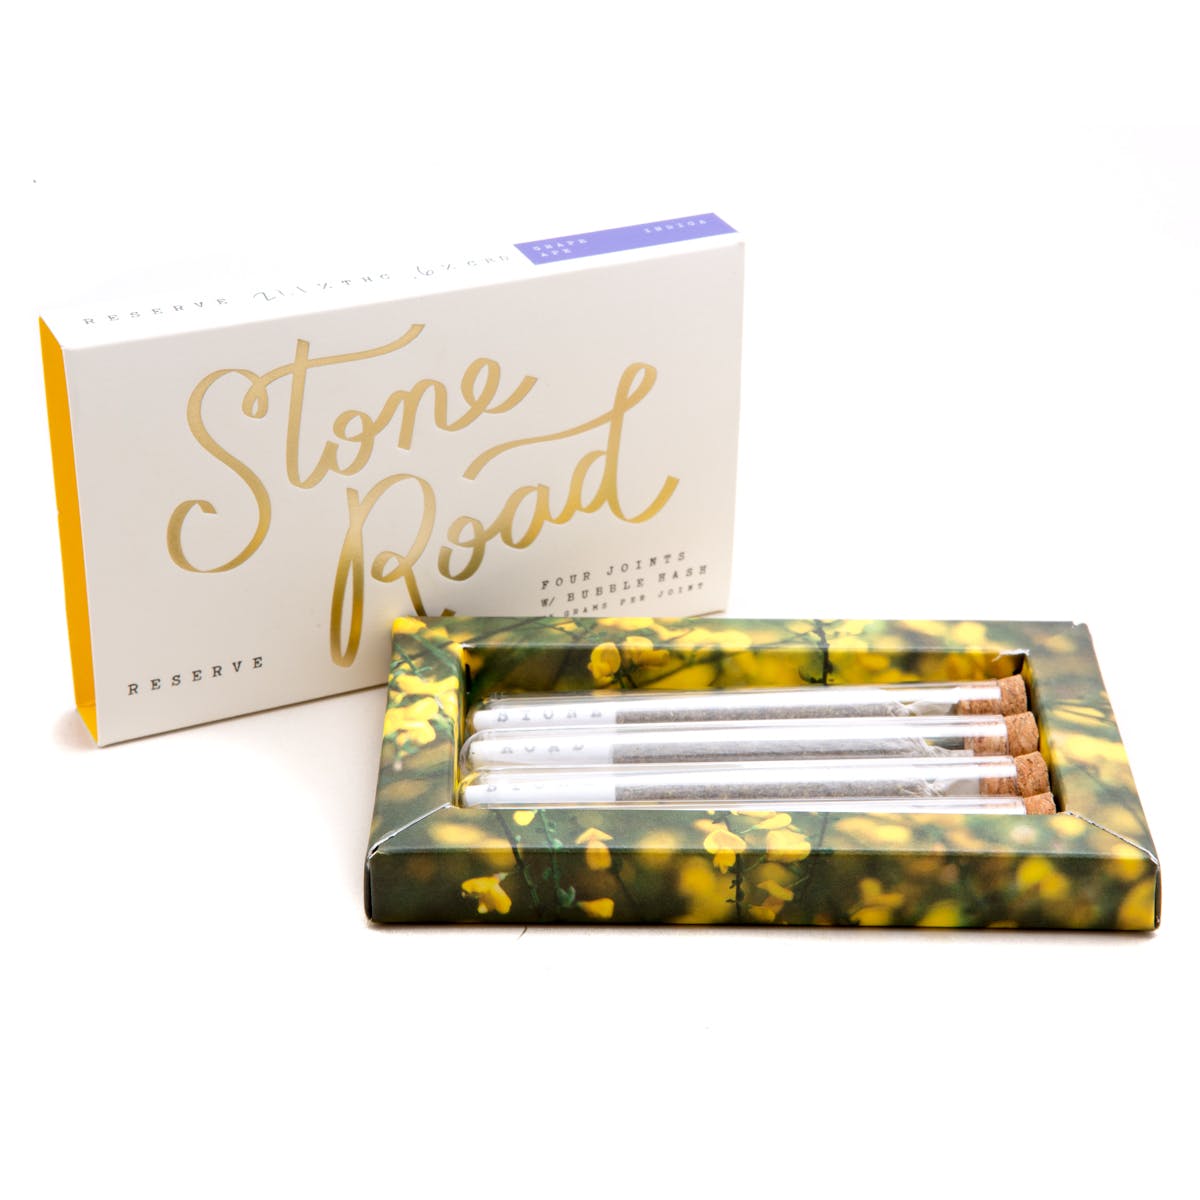 Stone Road - Reserve Pack